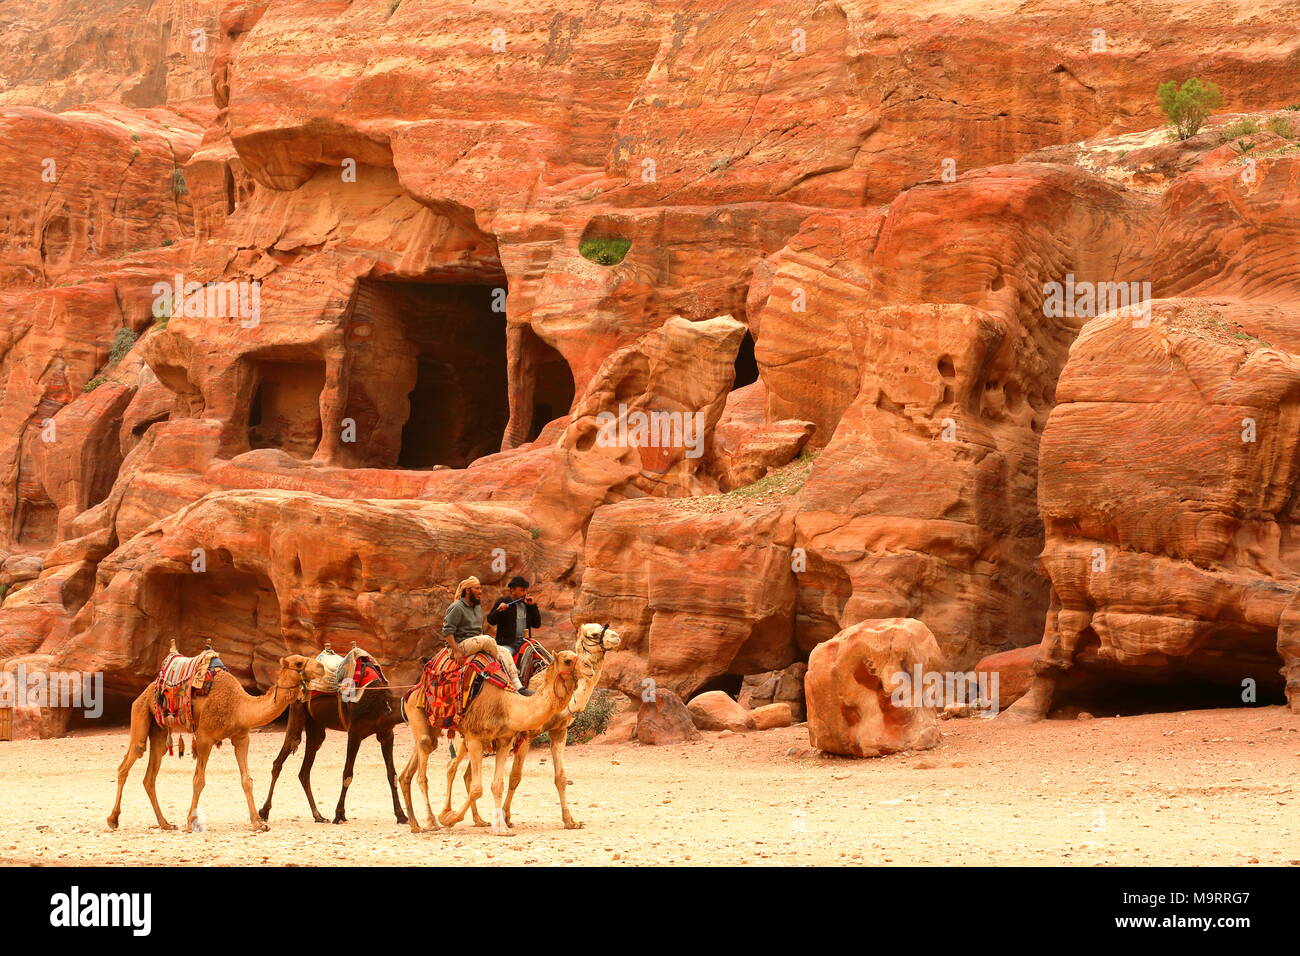 PETRA, JORDAN - MARCH 13, 2016: Bedouins riding their camels with colorful sandstones in the background Stock Photo